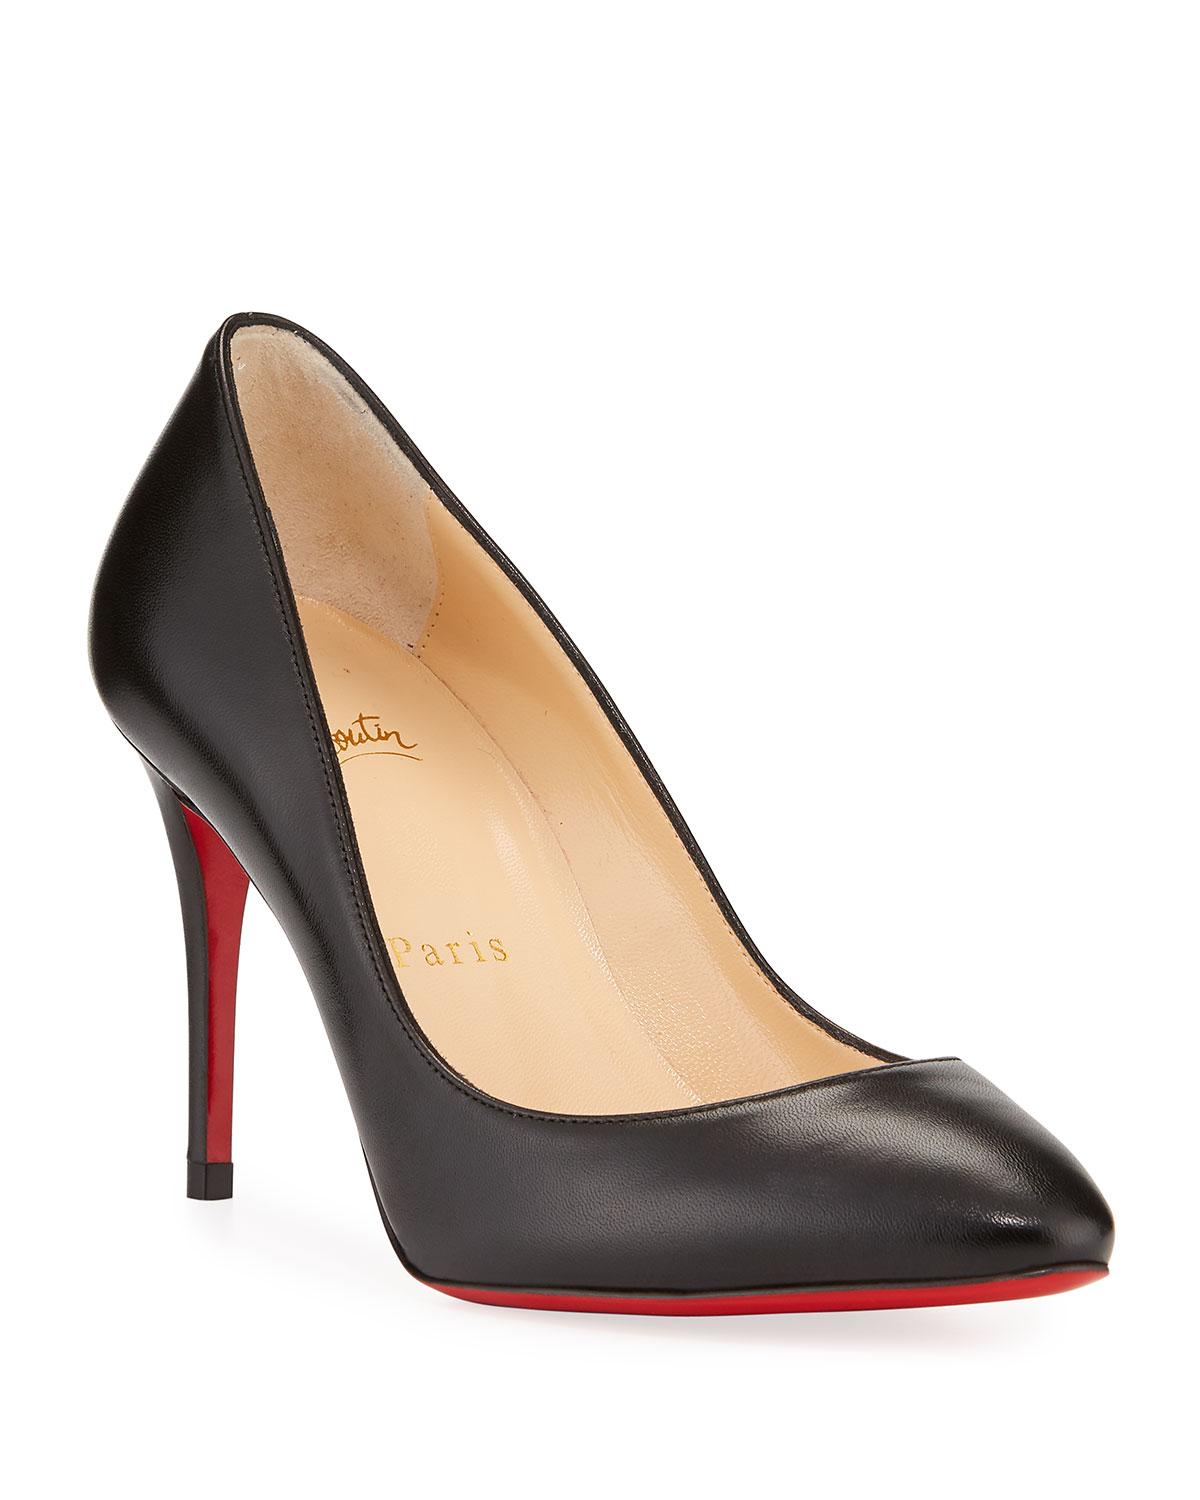 Christian Louboutin Eloise 85mm Napa Leather Red Sole Pumps in Black - Lyst